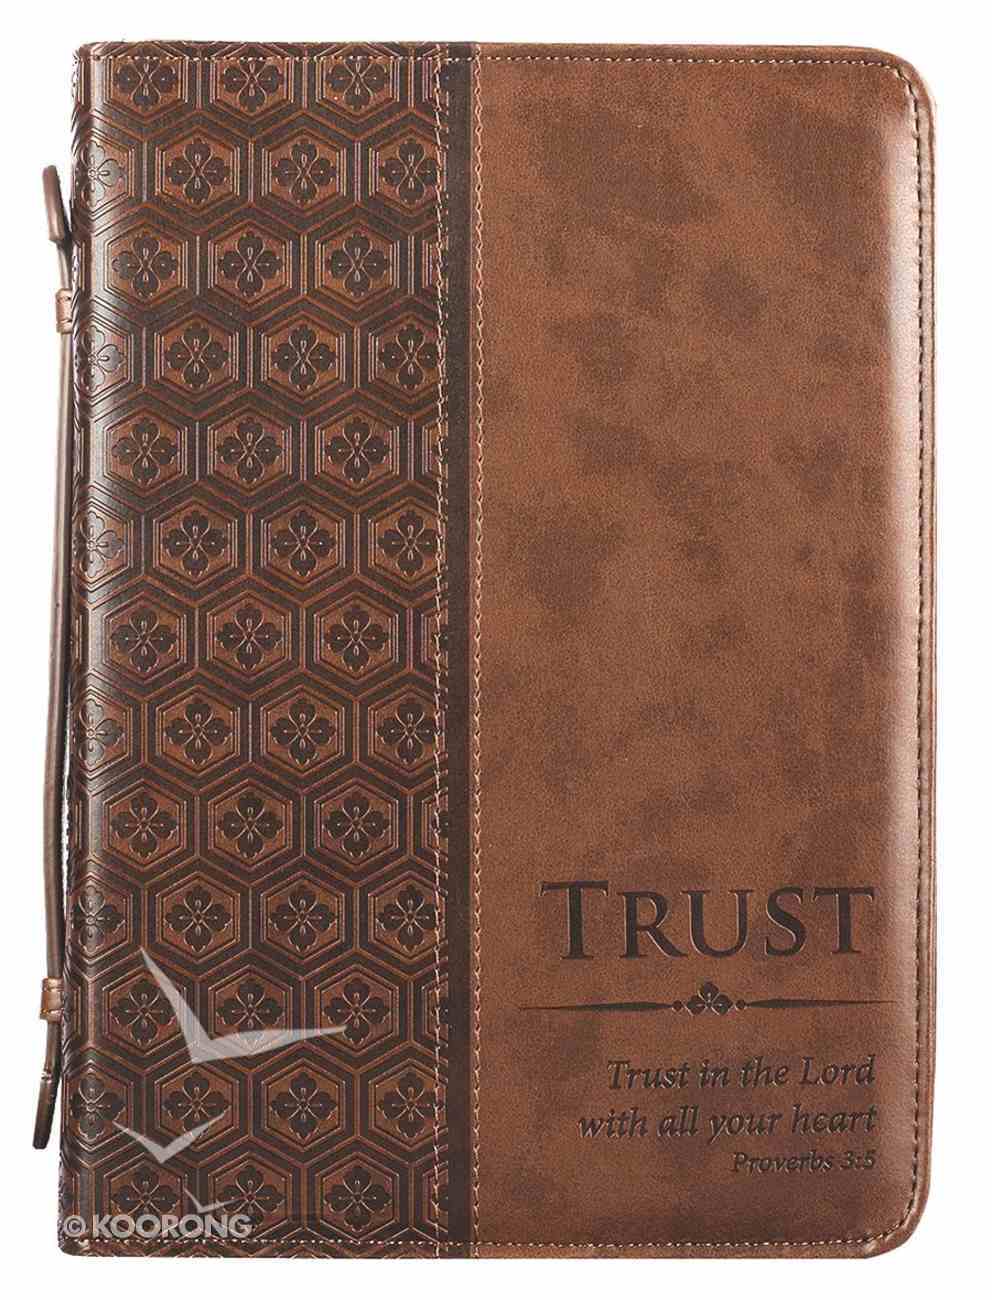 Bible Cover Classic Large: Trust Prov 3:5, Brown Luxleather Bible Cover